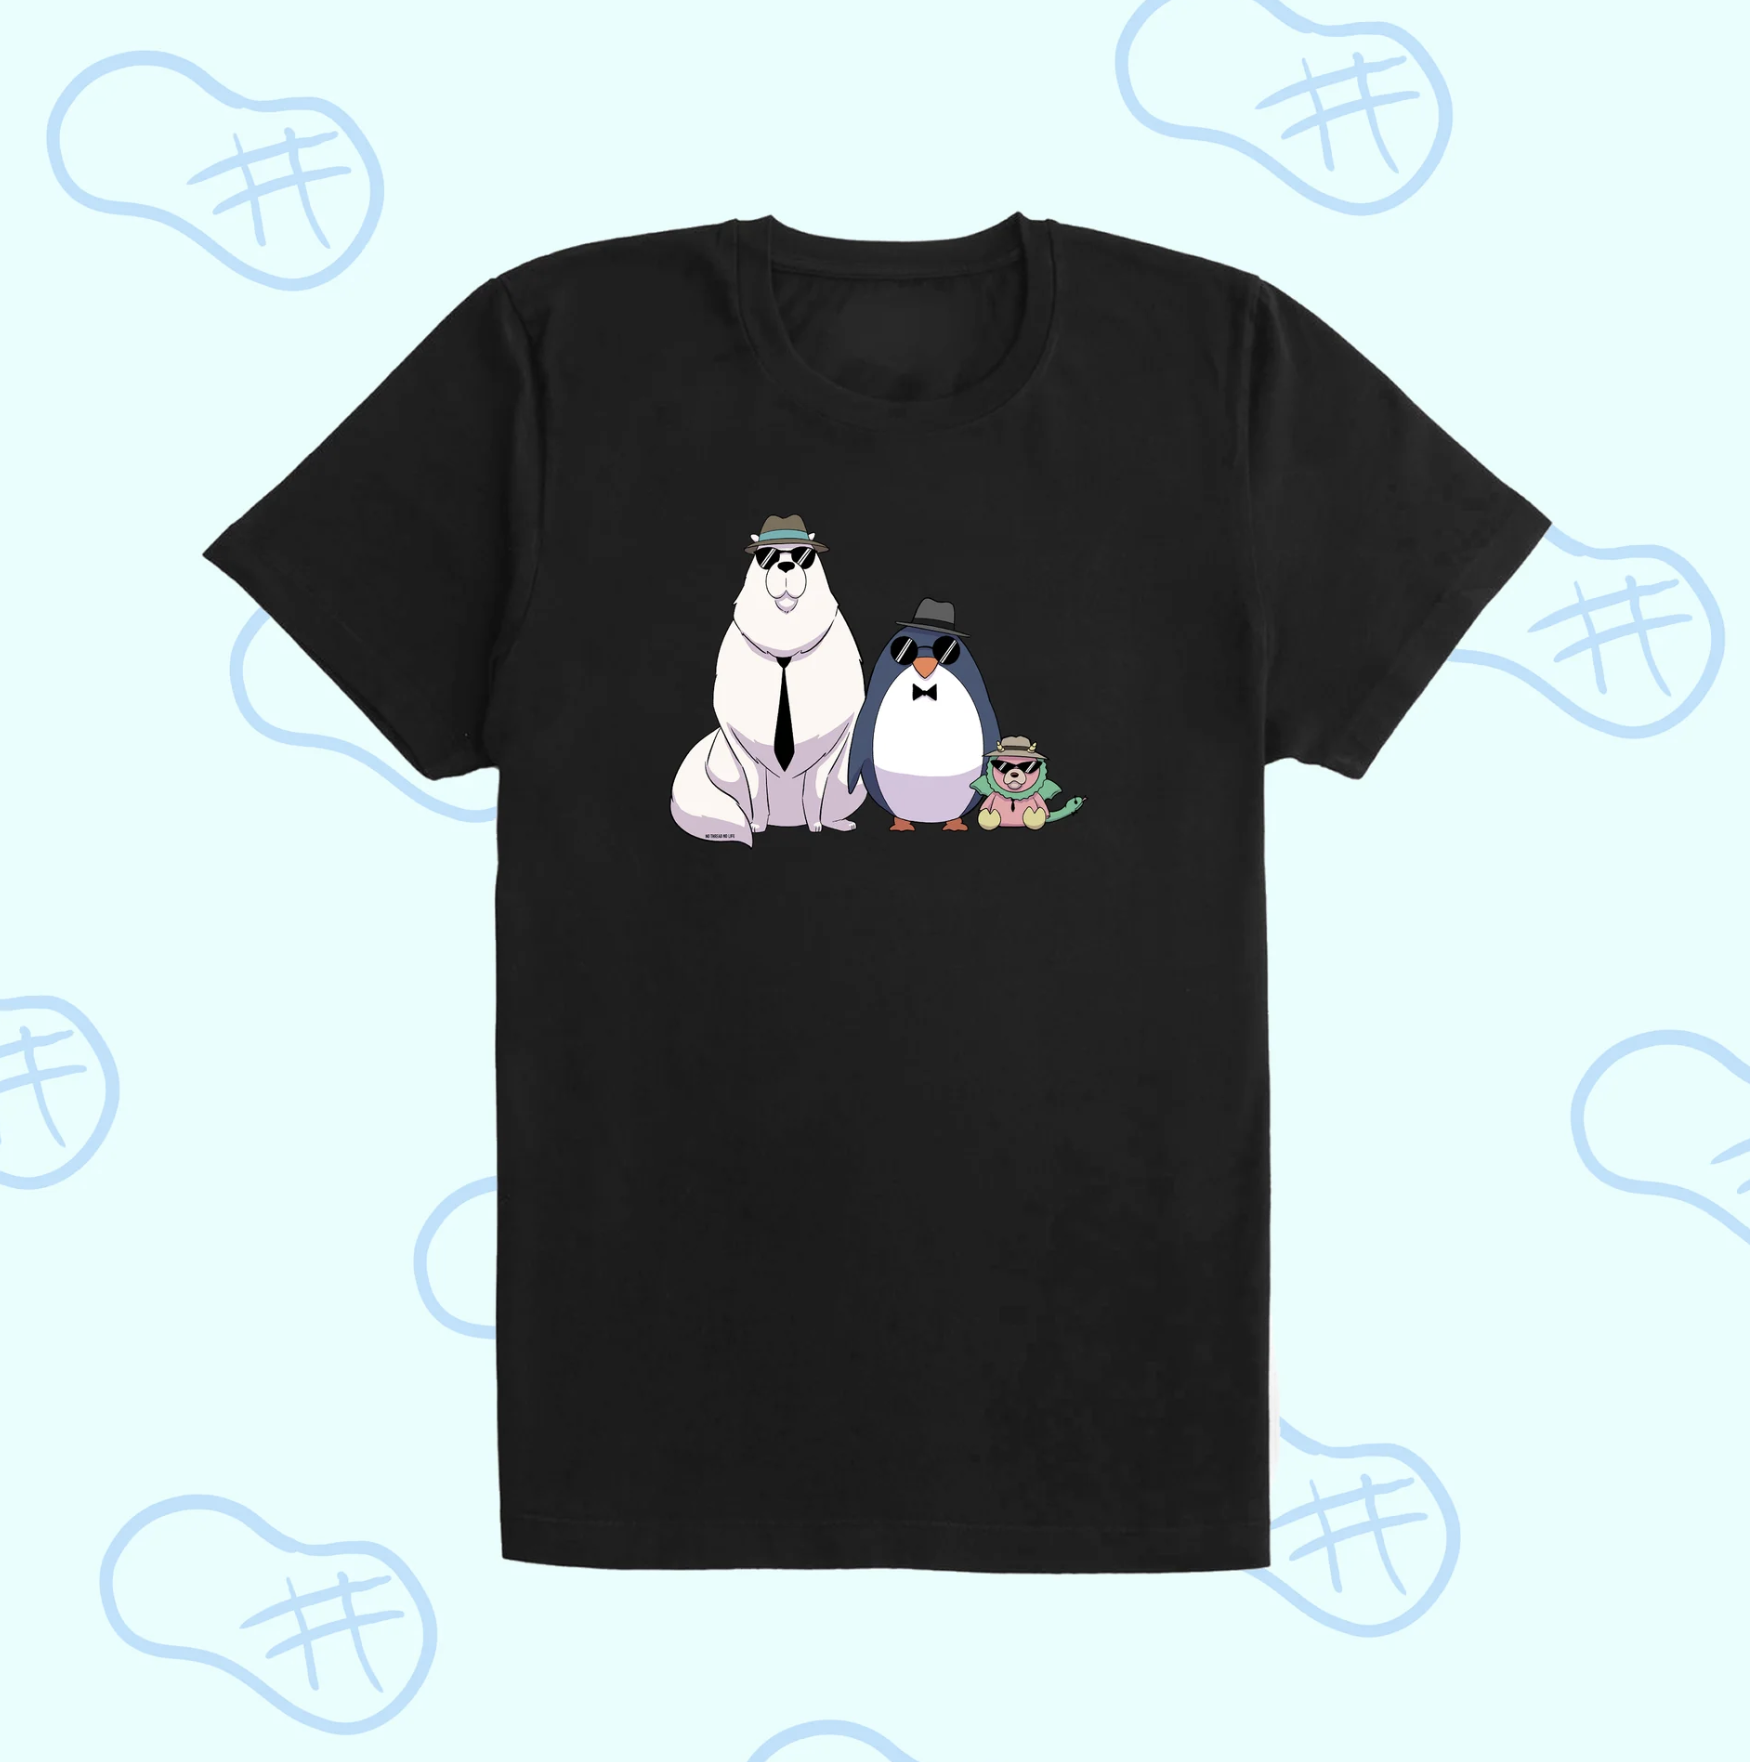 Black T-shirt with a graphic of animated dog, penguin, and chimera characters in sunglasses